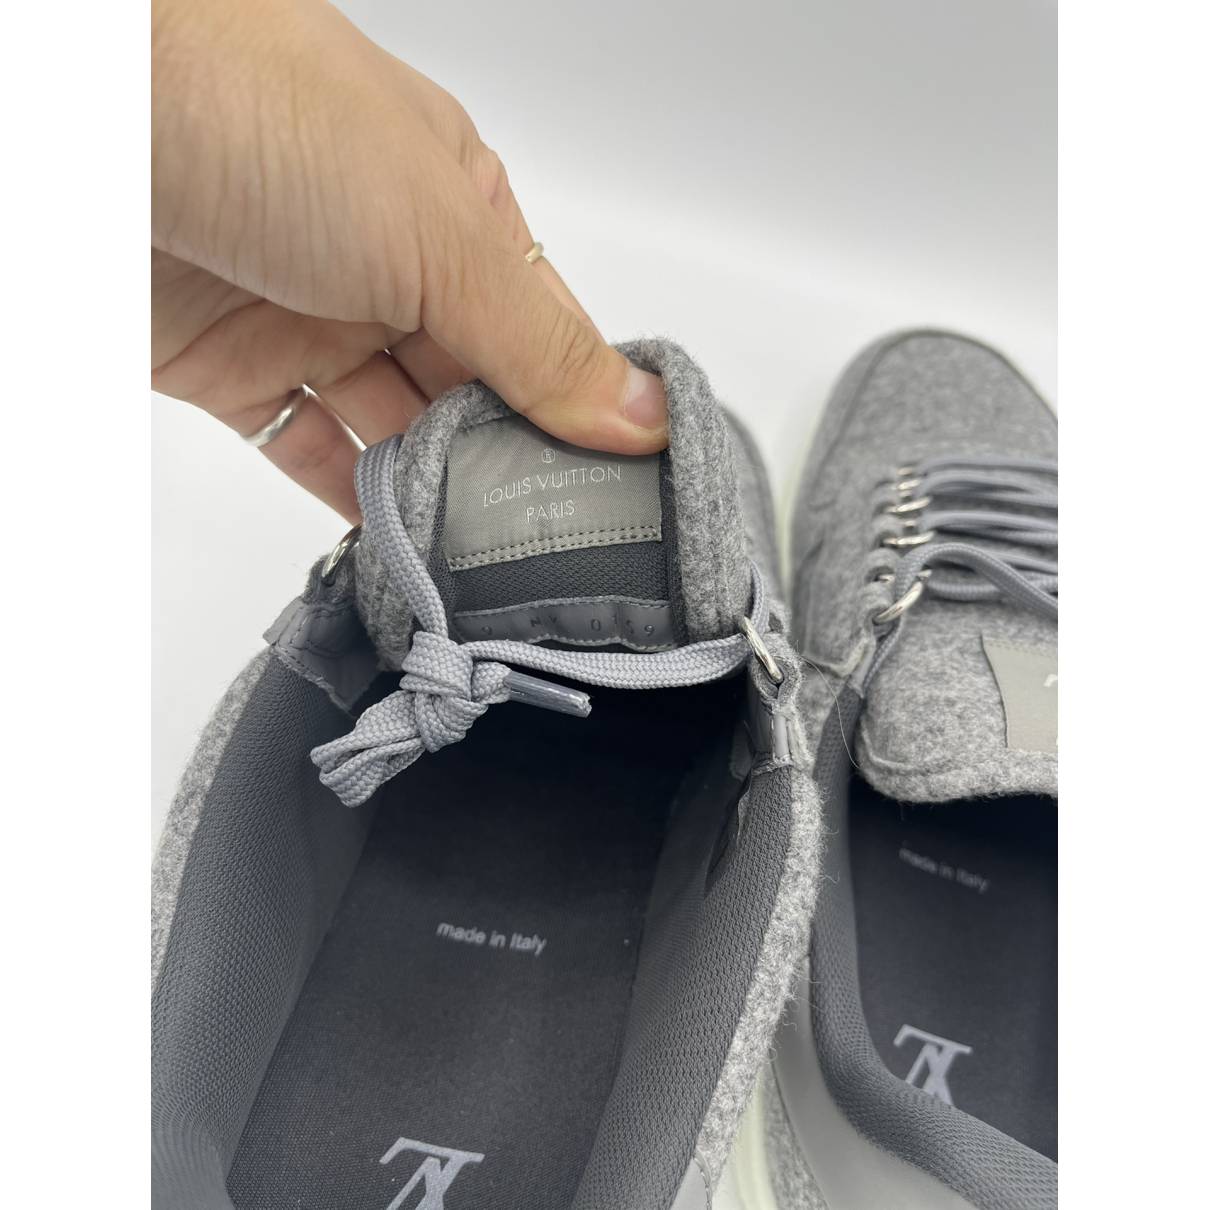 Lv trainer low trainers Louis Vuitton Grey size 10.5 US in Other - 32723074